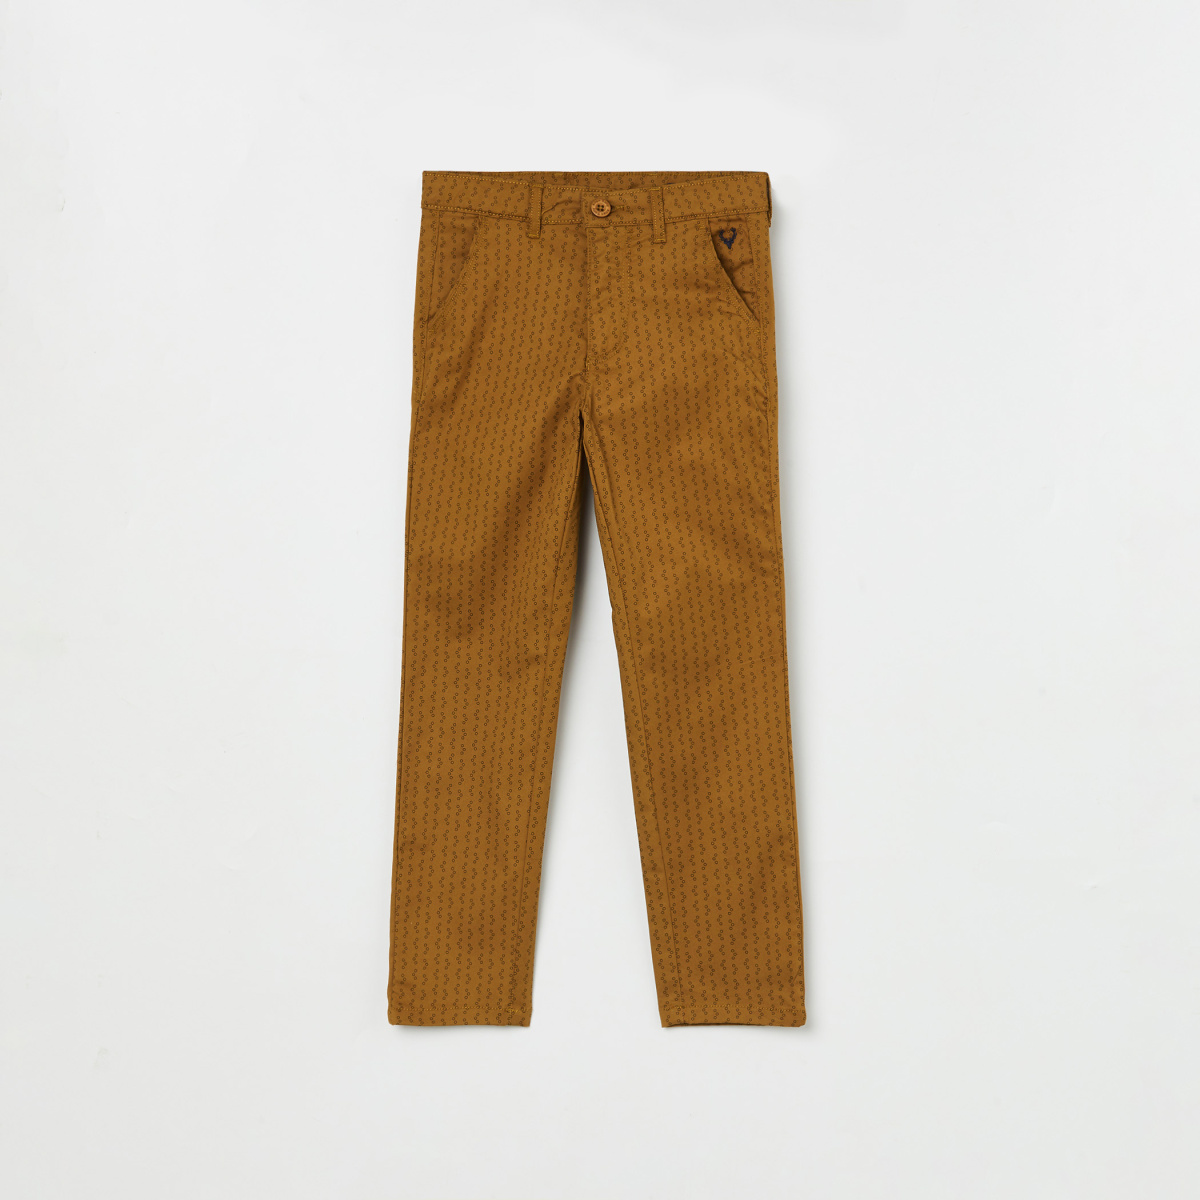 ALLEN SOLLY Boys Printed Casual Trousers